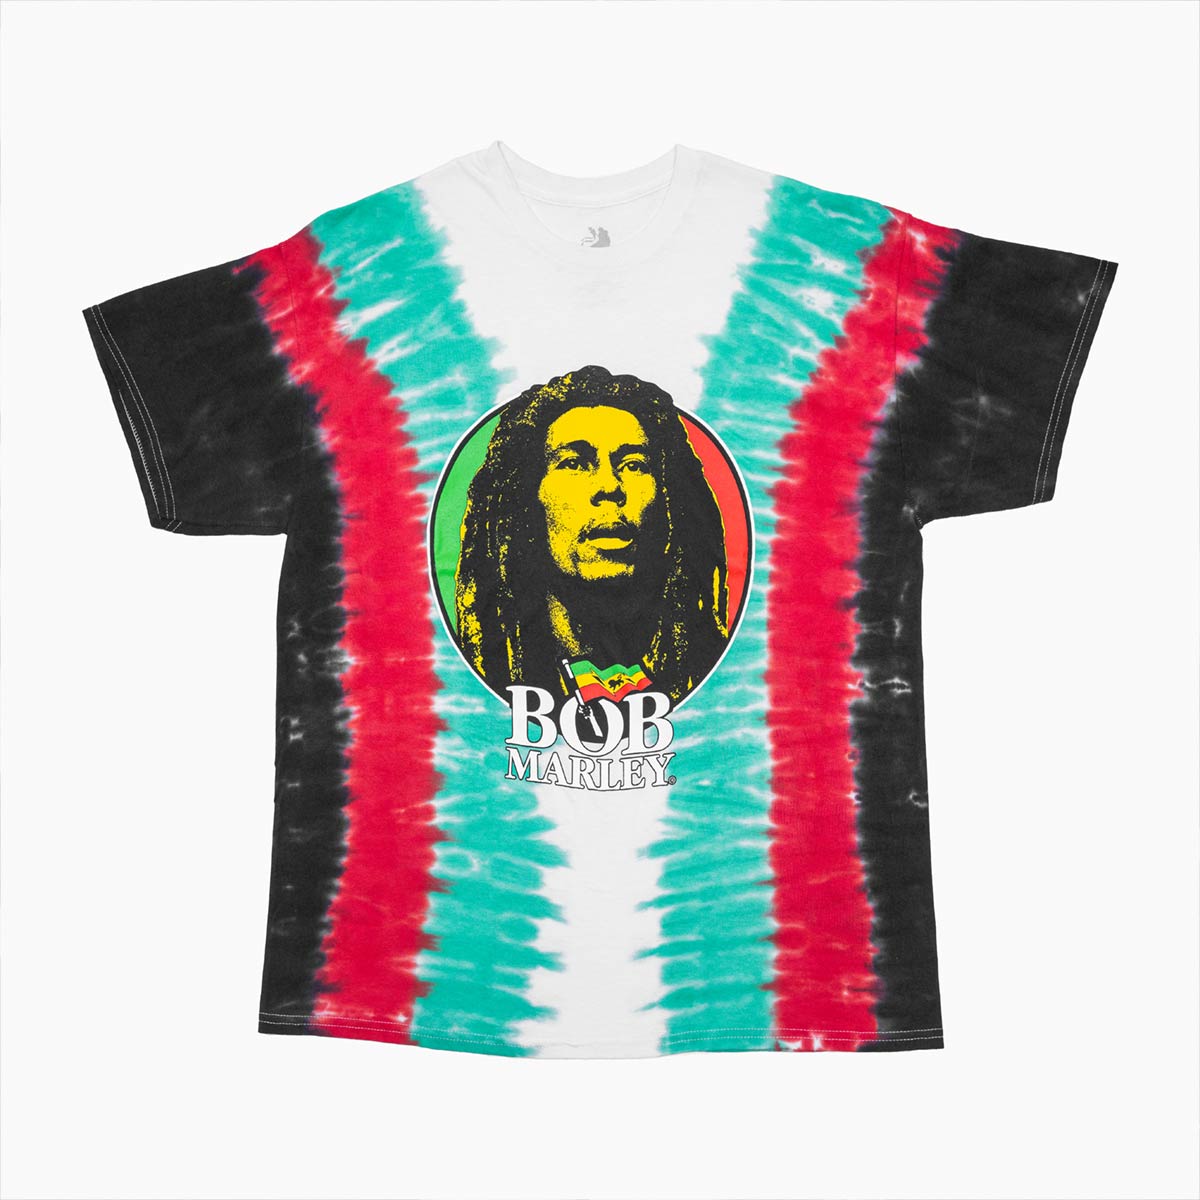 Bob Marley Adult Fit Tee with Tie Dye Design White image number 1